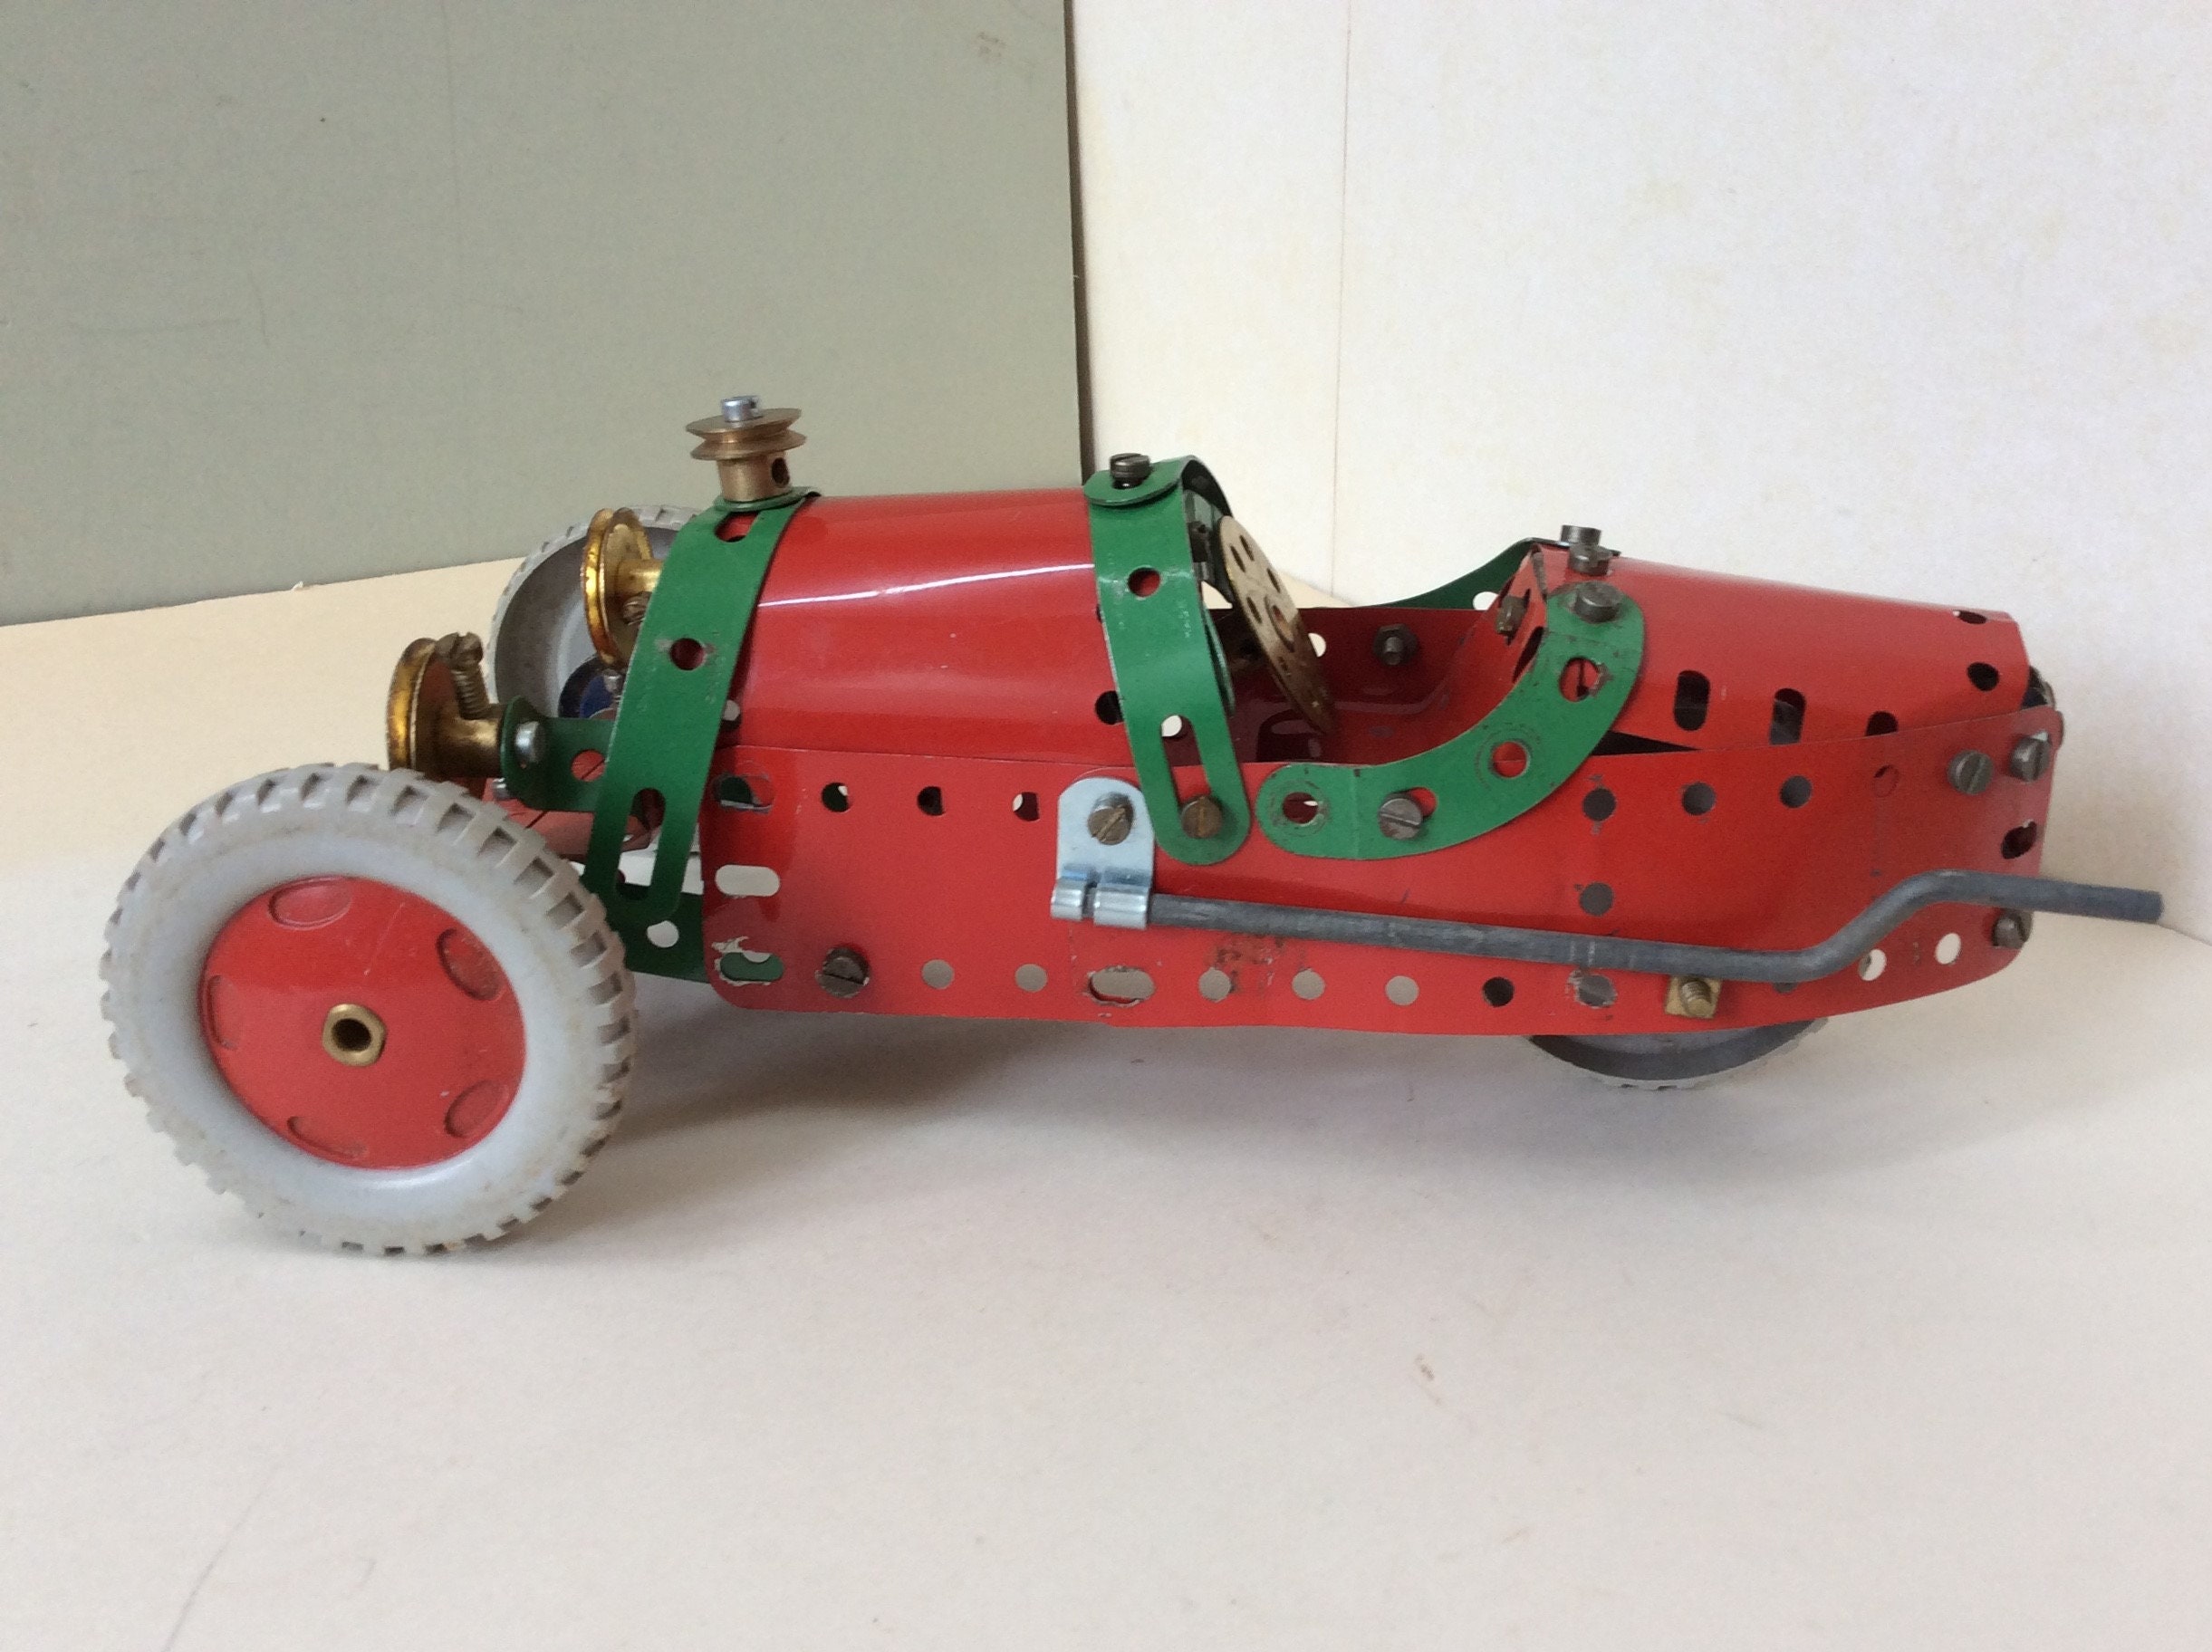 Vintage Meccano Car Scratch Built With Red & Green Meccano Parts